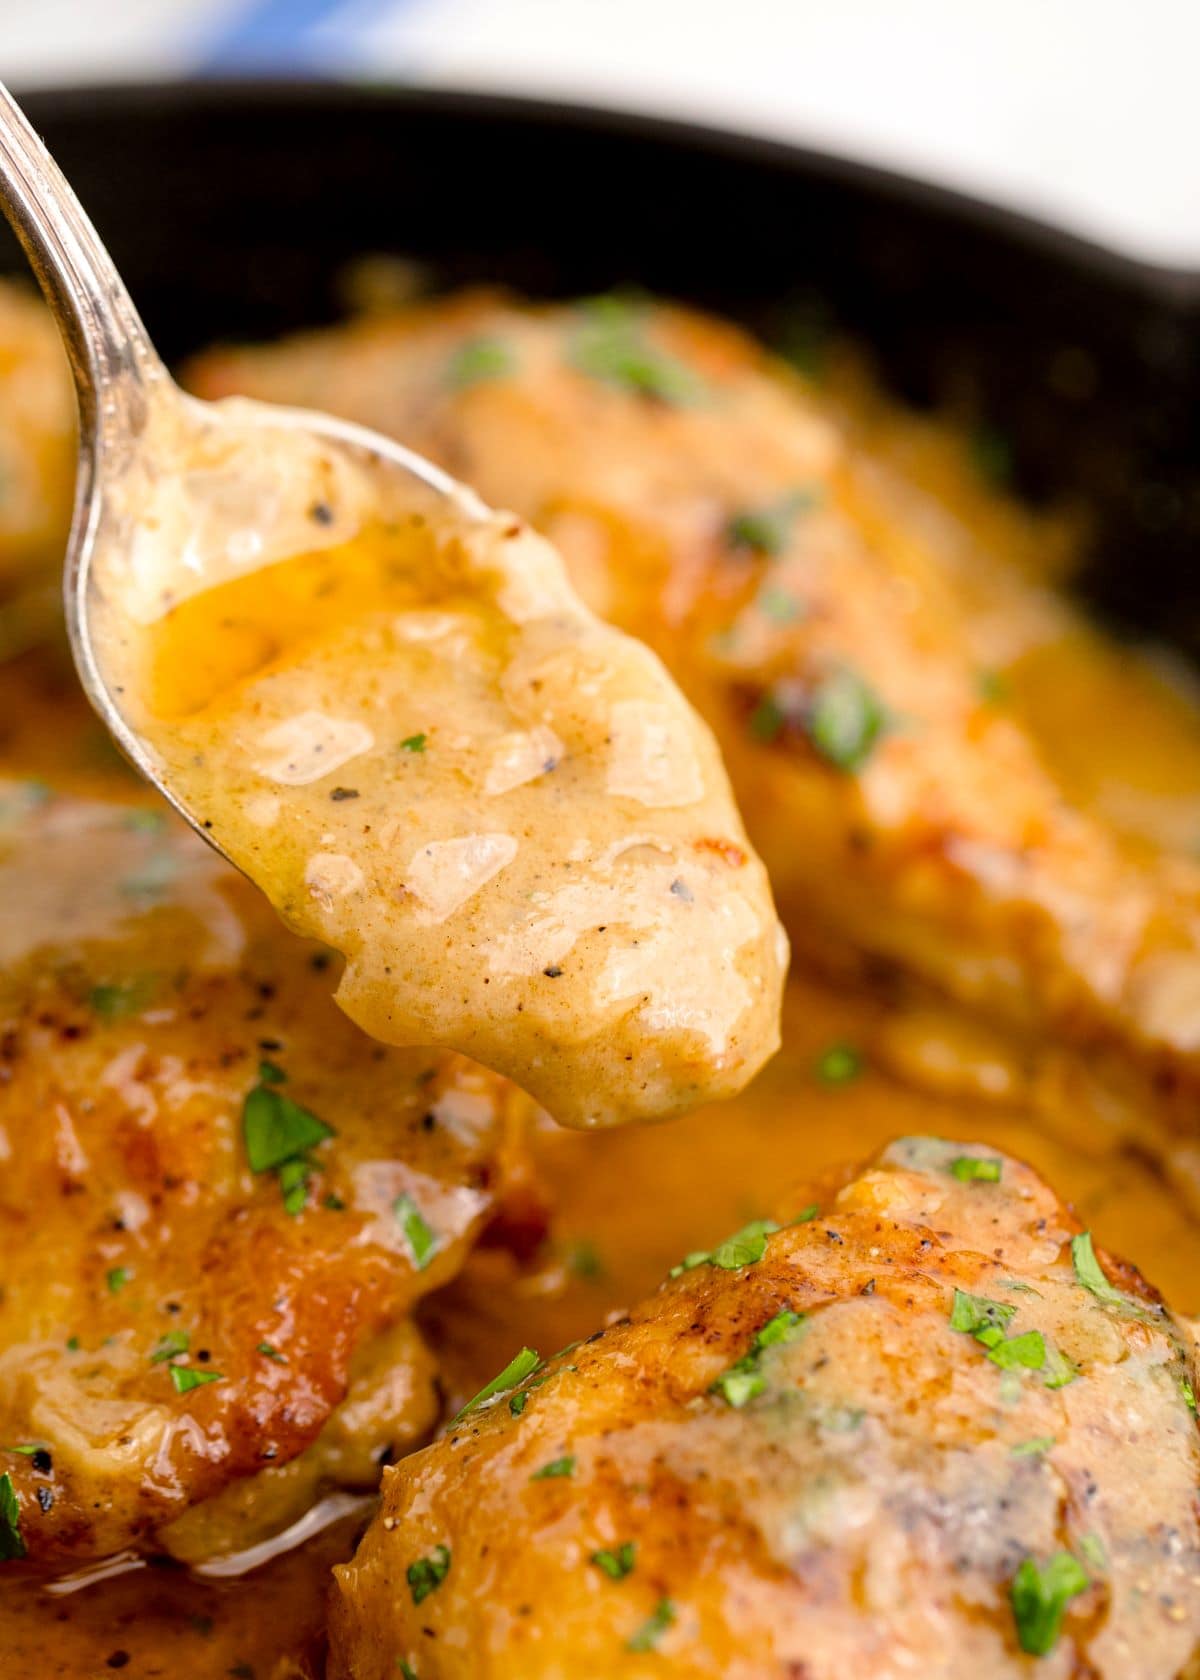 Close up shot of three chicken pieces with gravy. A spoon is lifting some of the gravy out of the pan.